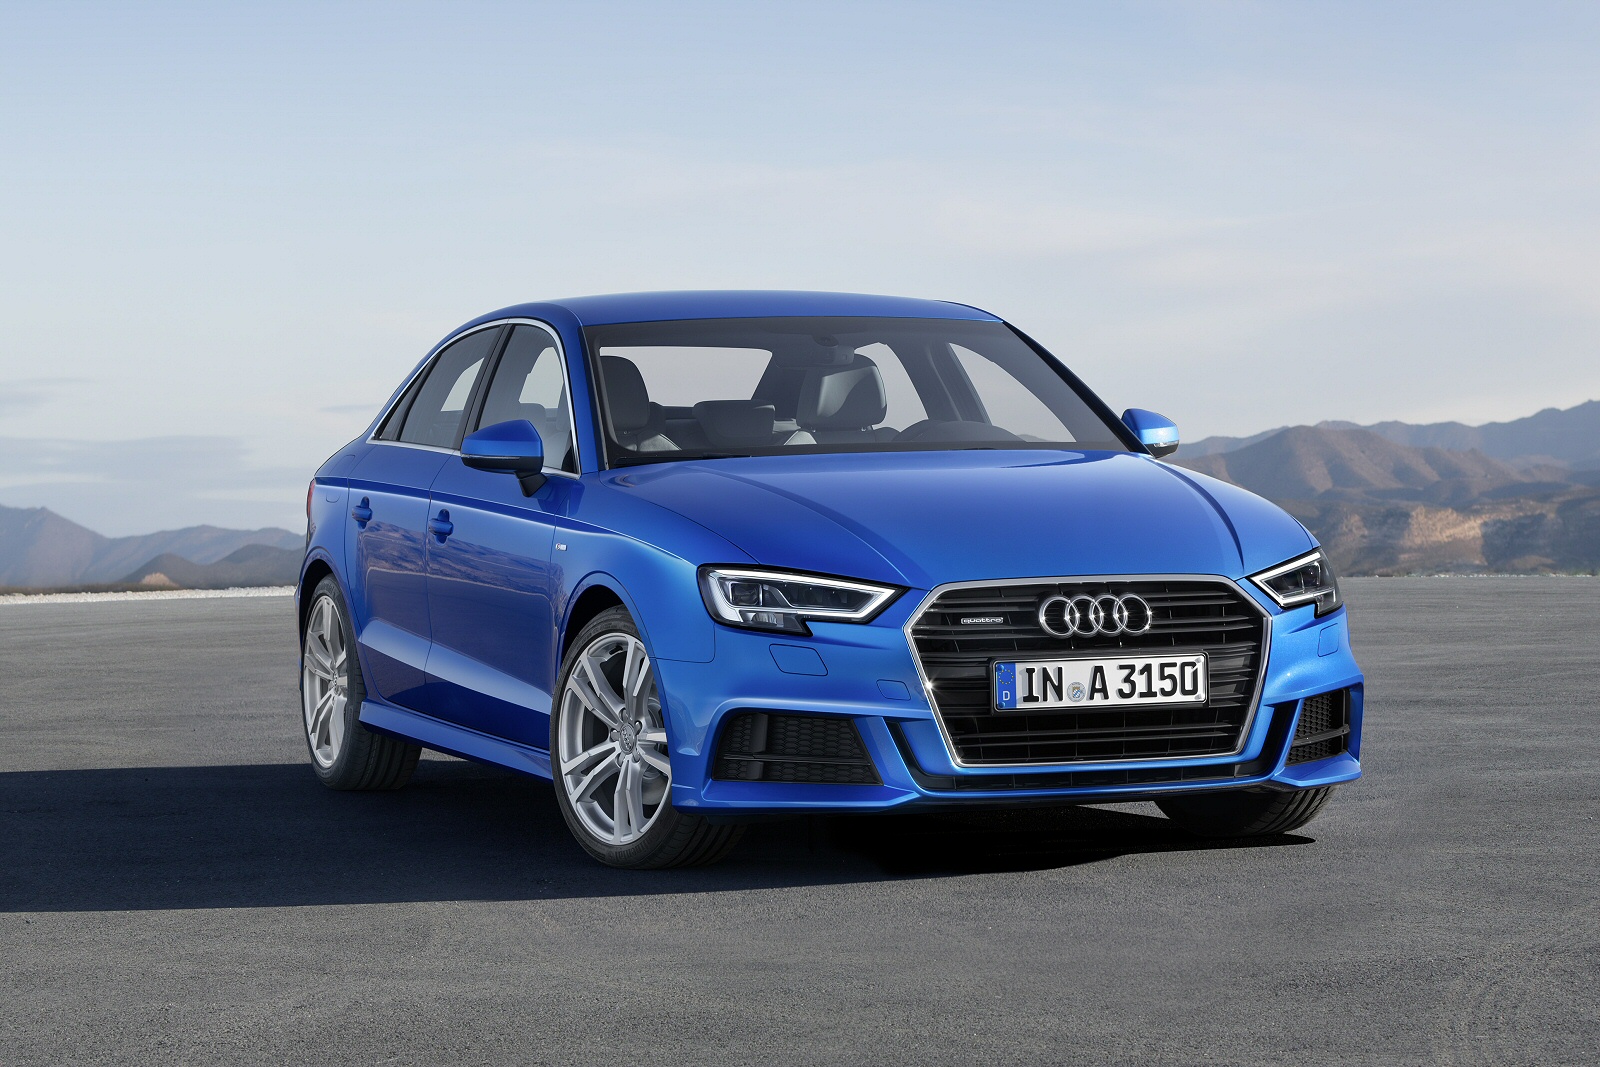 Best Vehicles For Personal Leasing Blue Audi A3 Saloon Off Road With Mountains In The Background